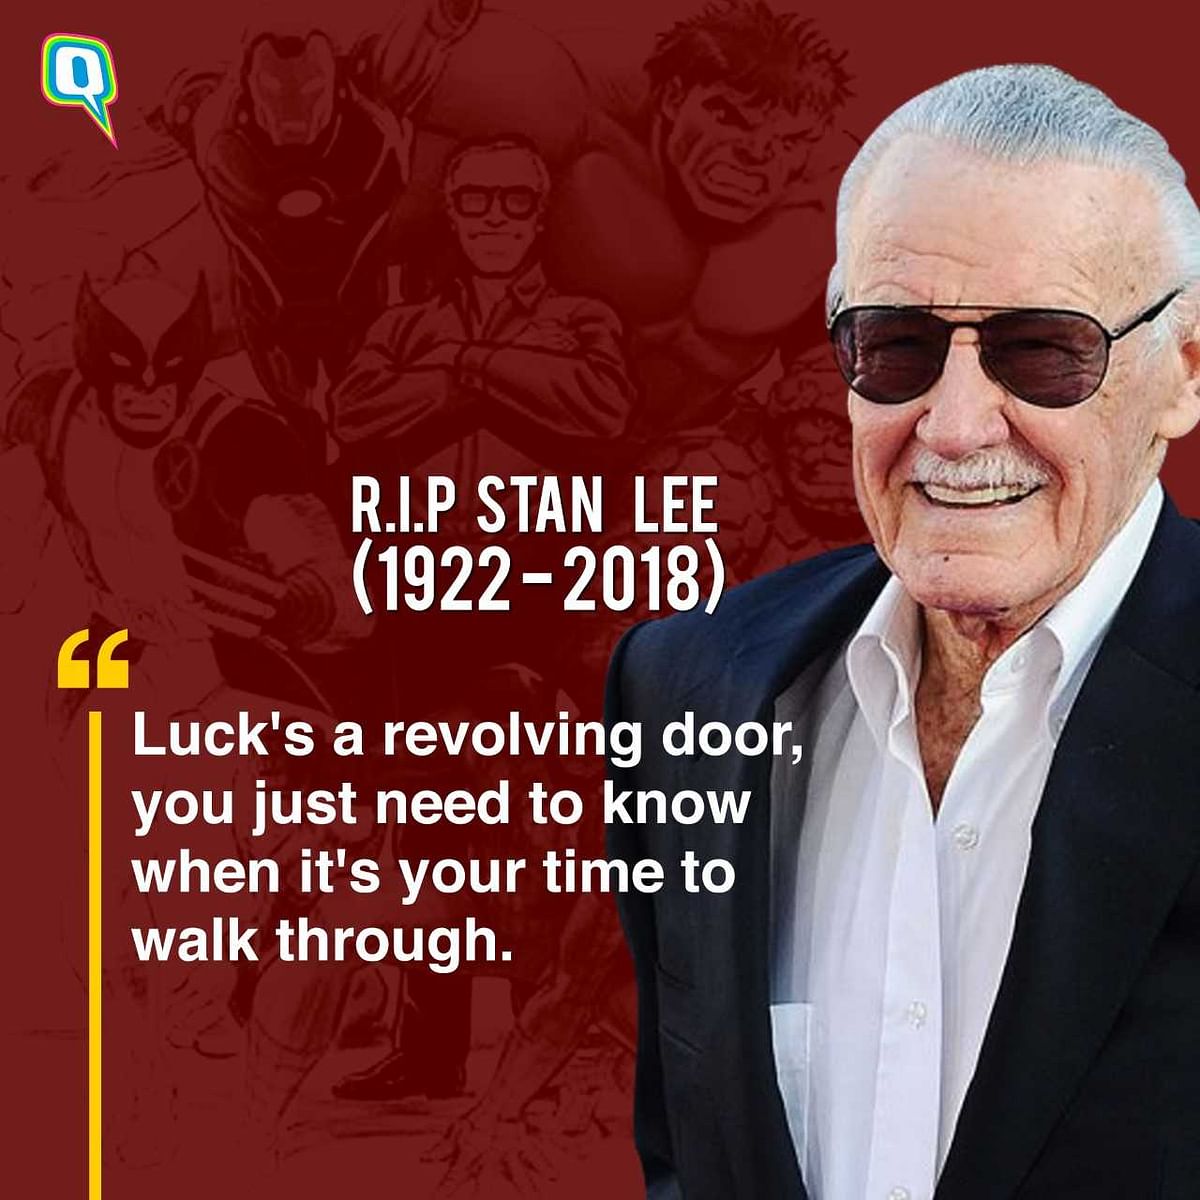 Here are a few quotes from the Godfather of Marvel Comic that inspires us to look for greatness within us.